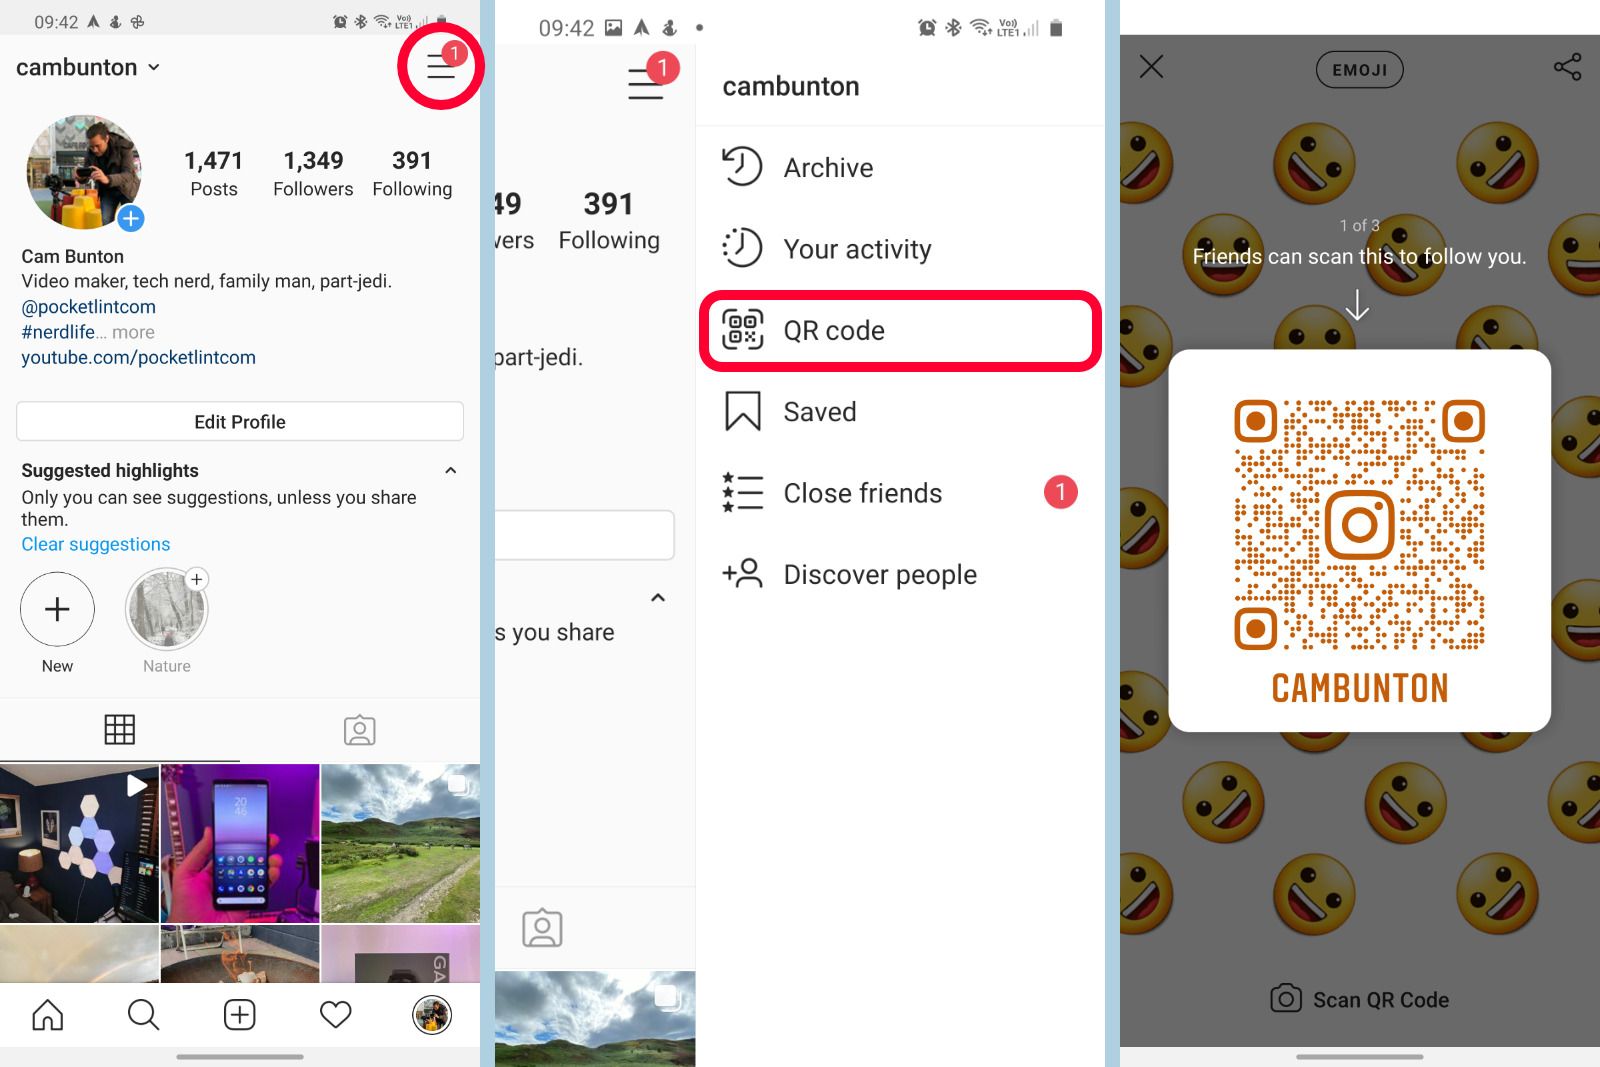 Instagram is rolling out QR codes worldwide, here's how to access yours and scan others photo 1